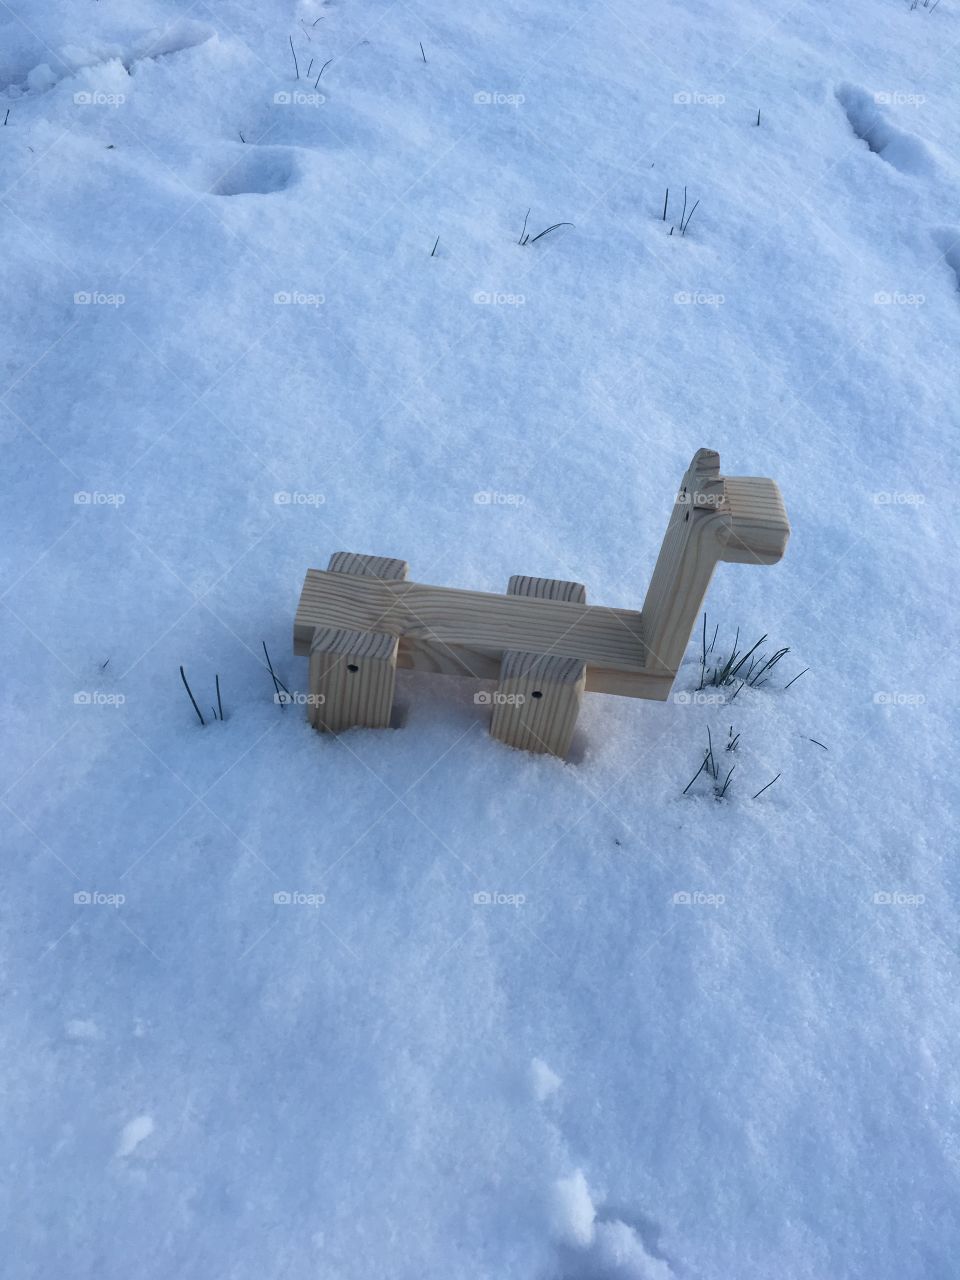 Wooden creature playing in the beautiful, clean snow